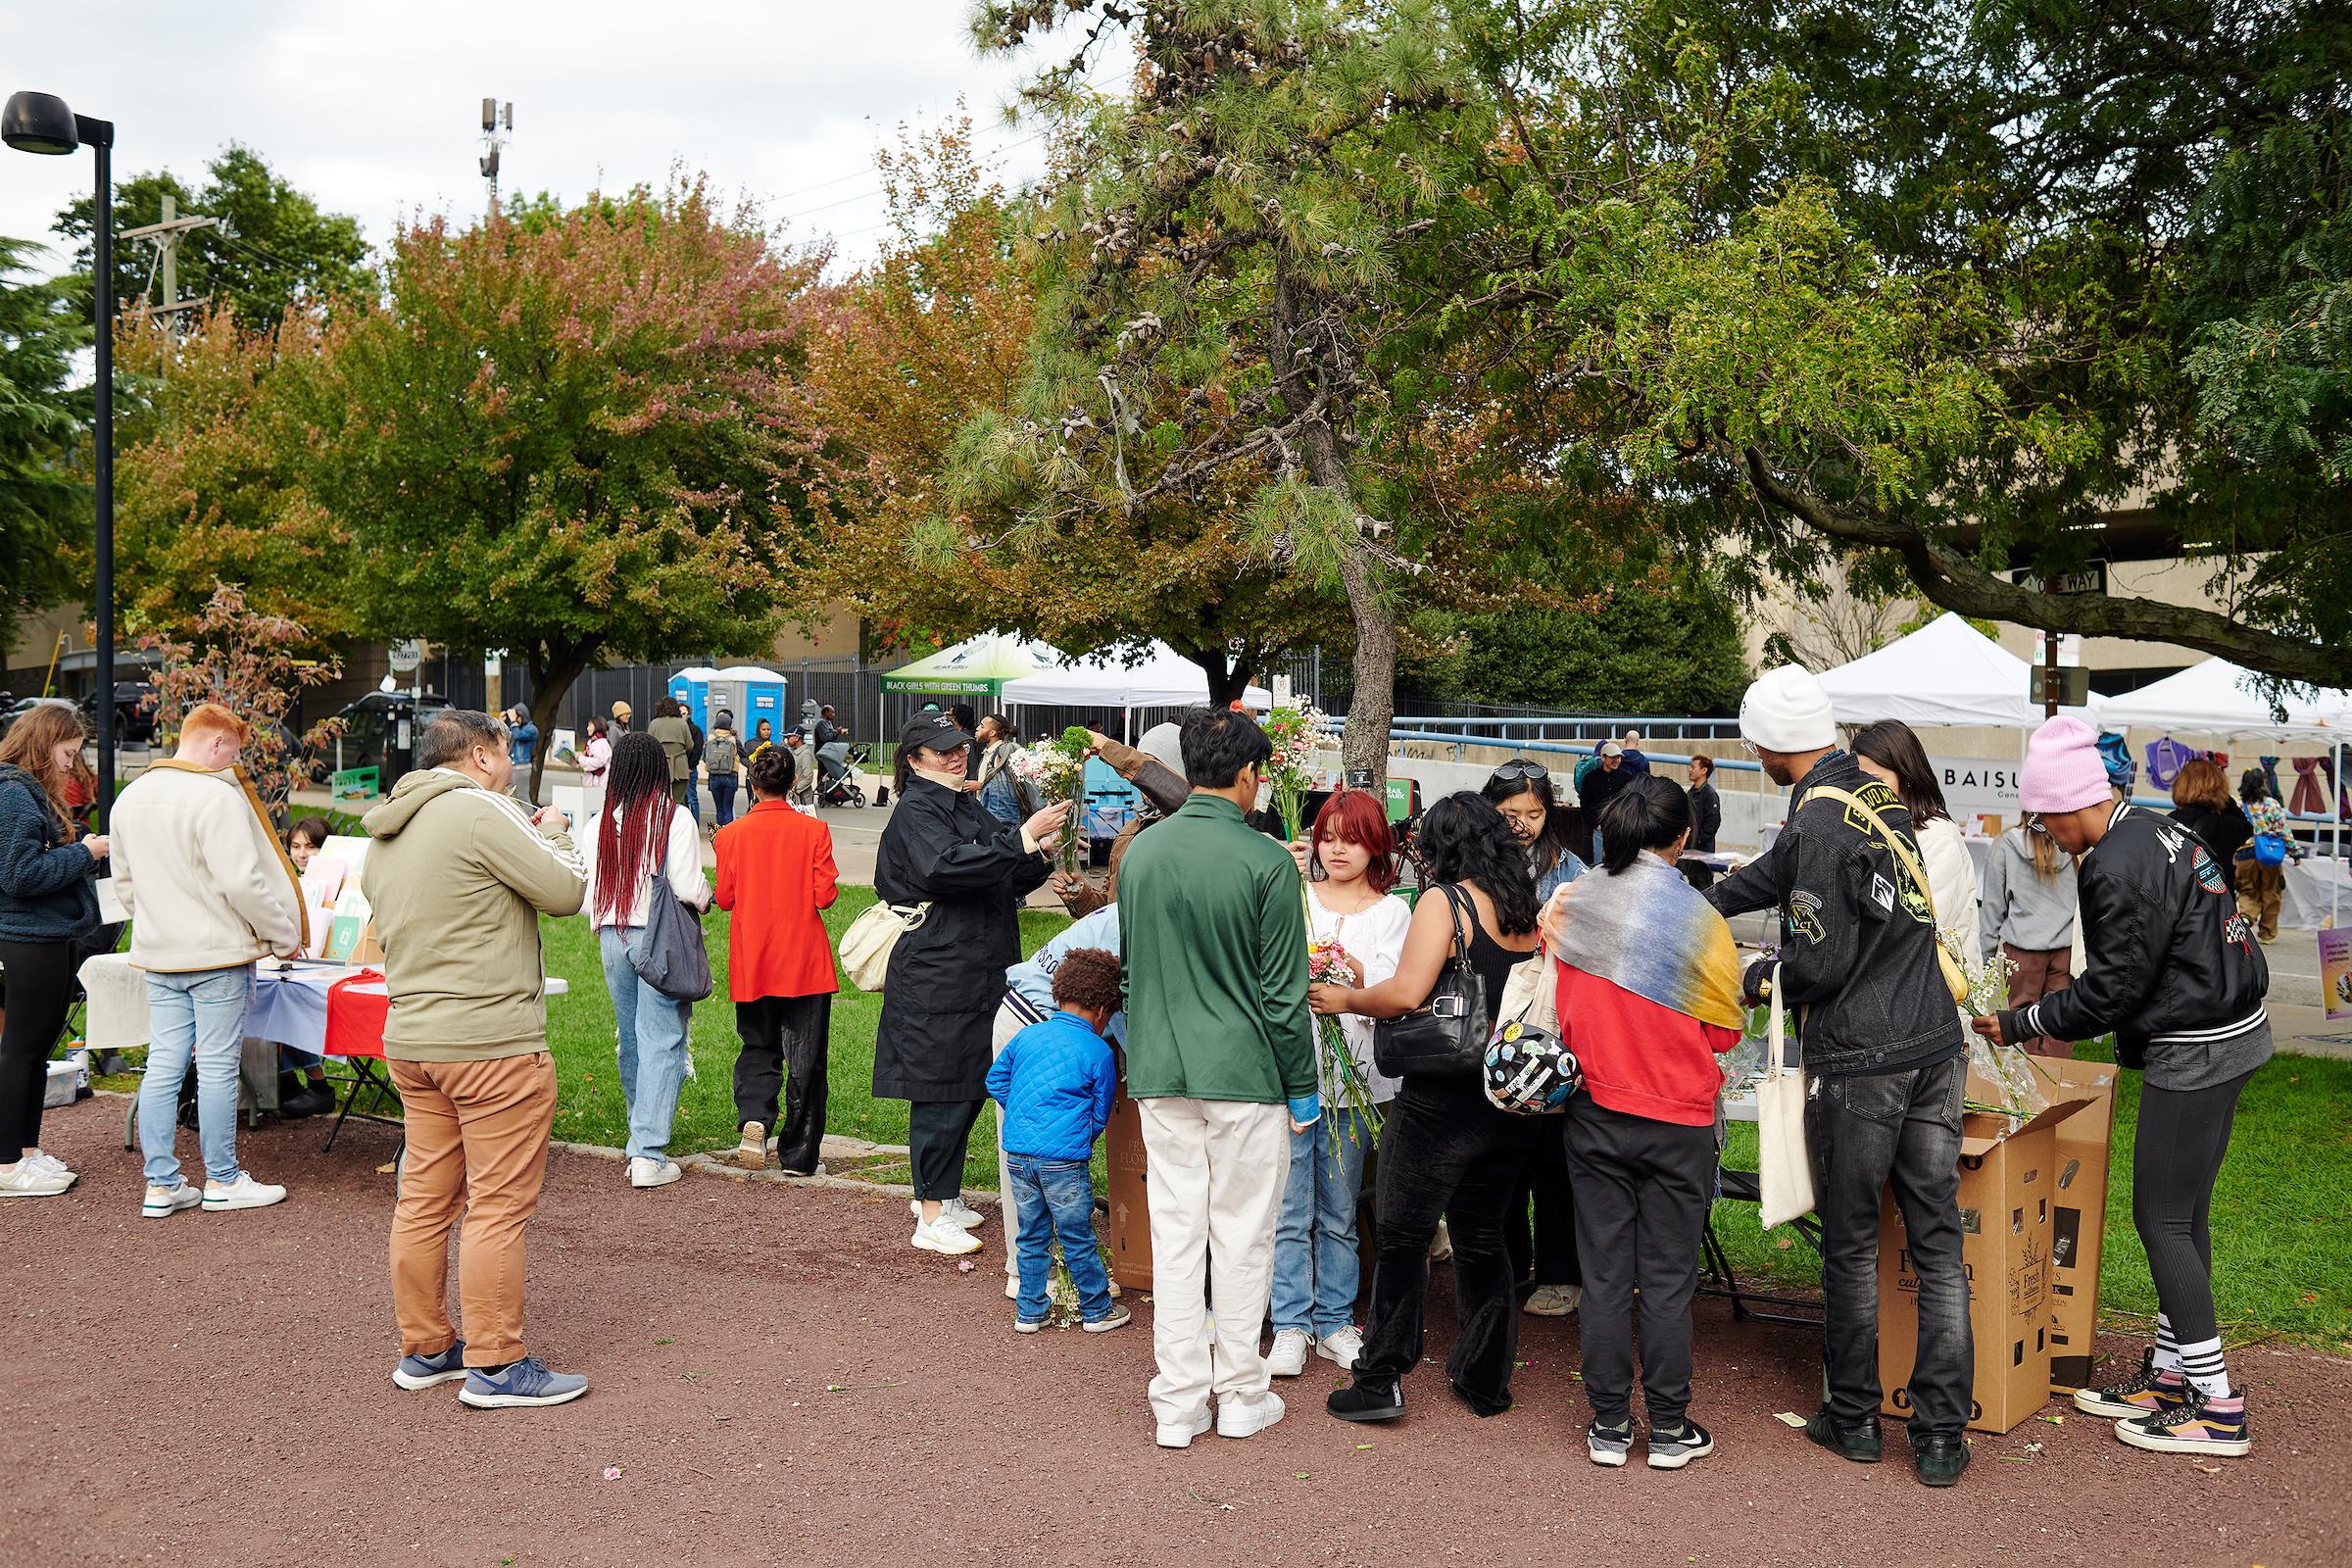 Photo by Albert Yee. Crowds of people gather around different vendors in a park.